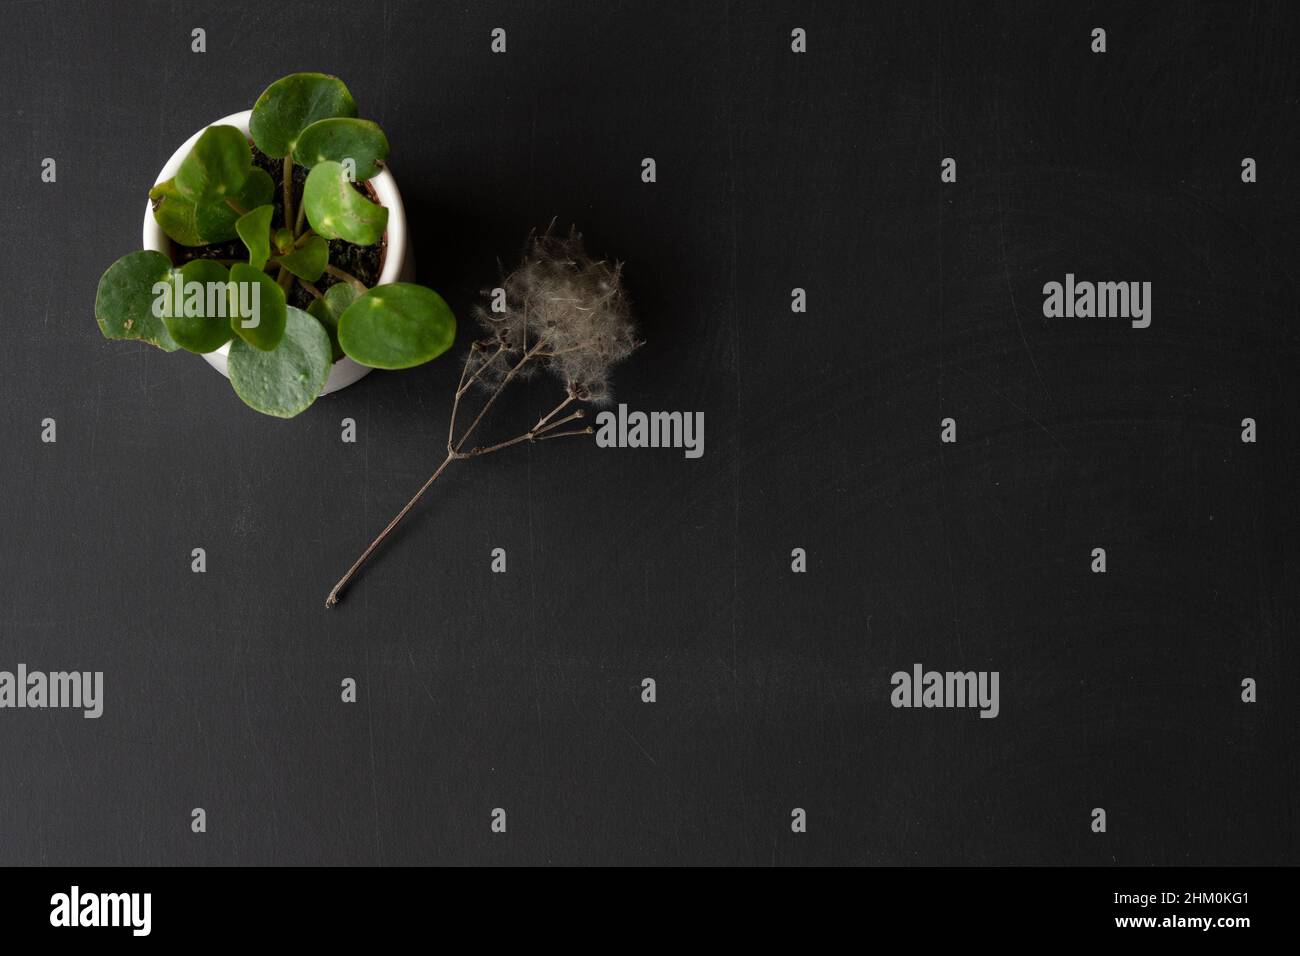 Pilea plant on a backboard background, with space for copy. Stock Photo